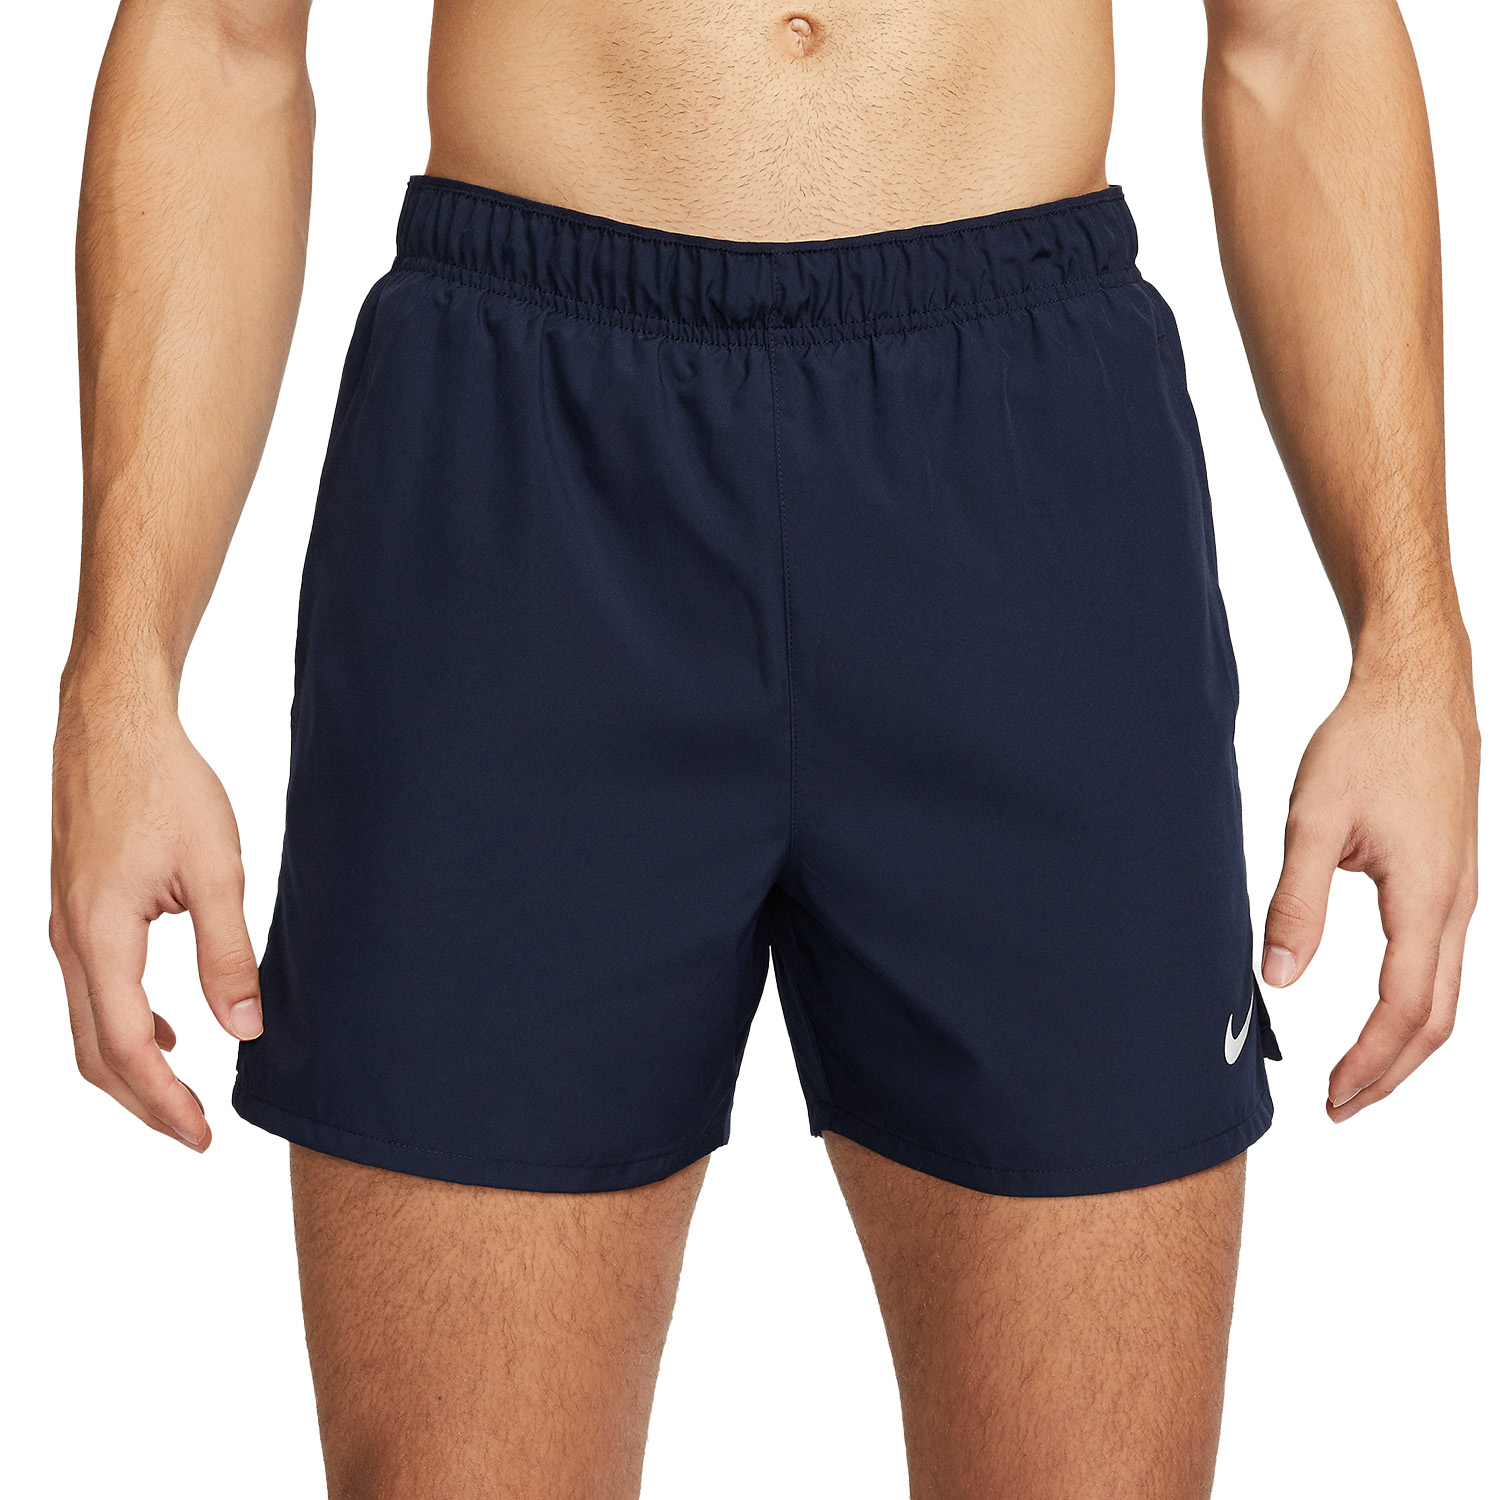 Nike Challenger 5in Shorts - Obsidian/Black/Reflective Silver